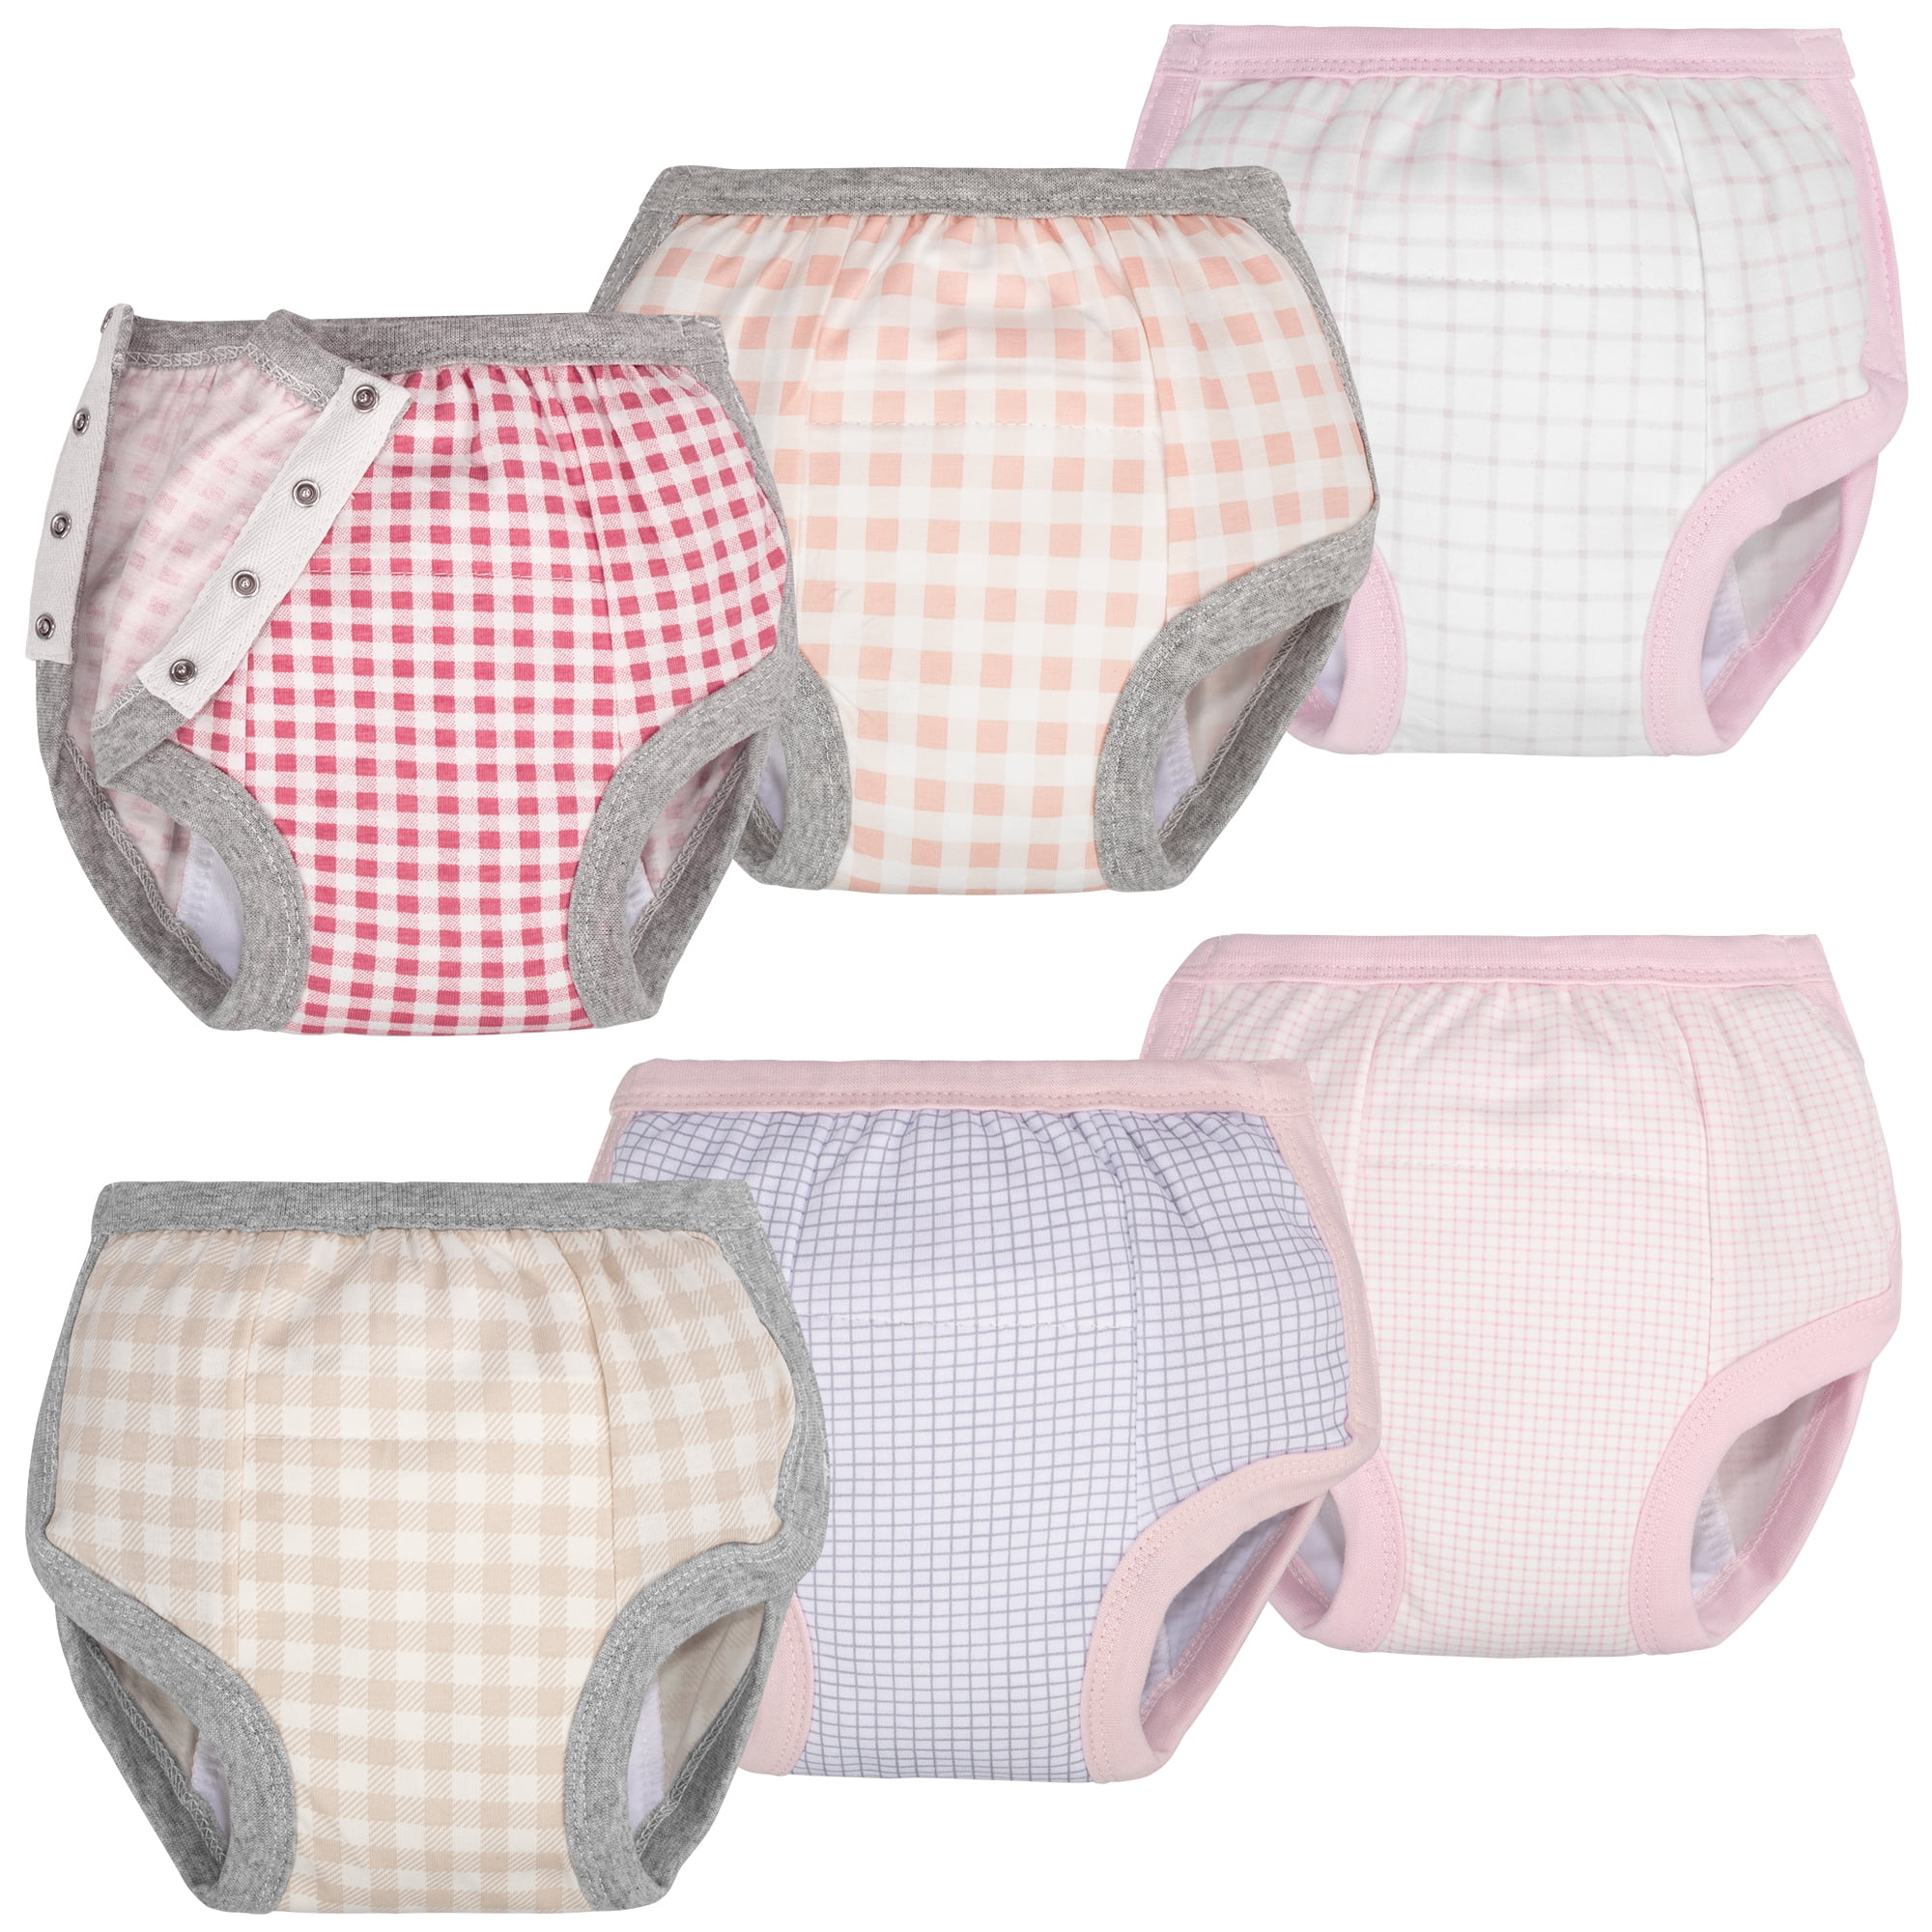  4 Pack Toddler Potty Training Pants Six Layered Cotton Training  Underwear for Toddlers Girls Boys 6M-3T (A, 6-18 Months-S) : Baby